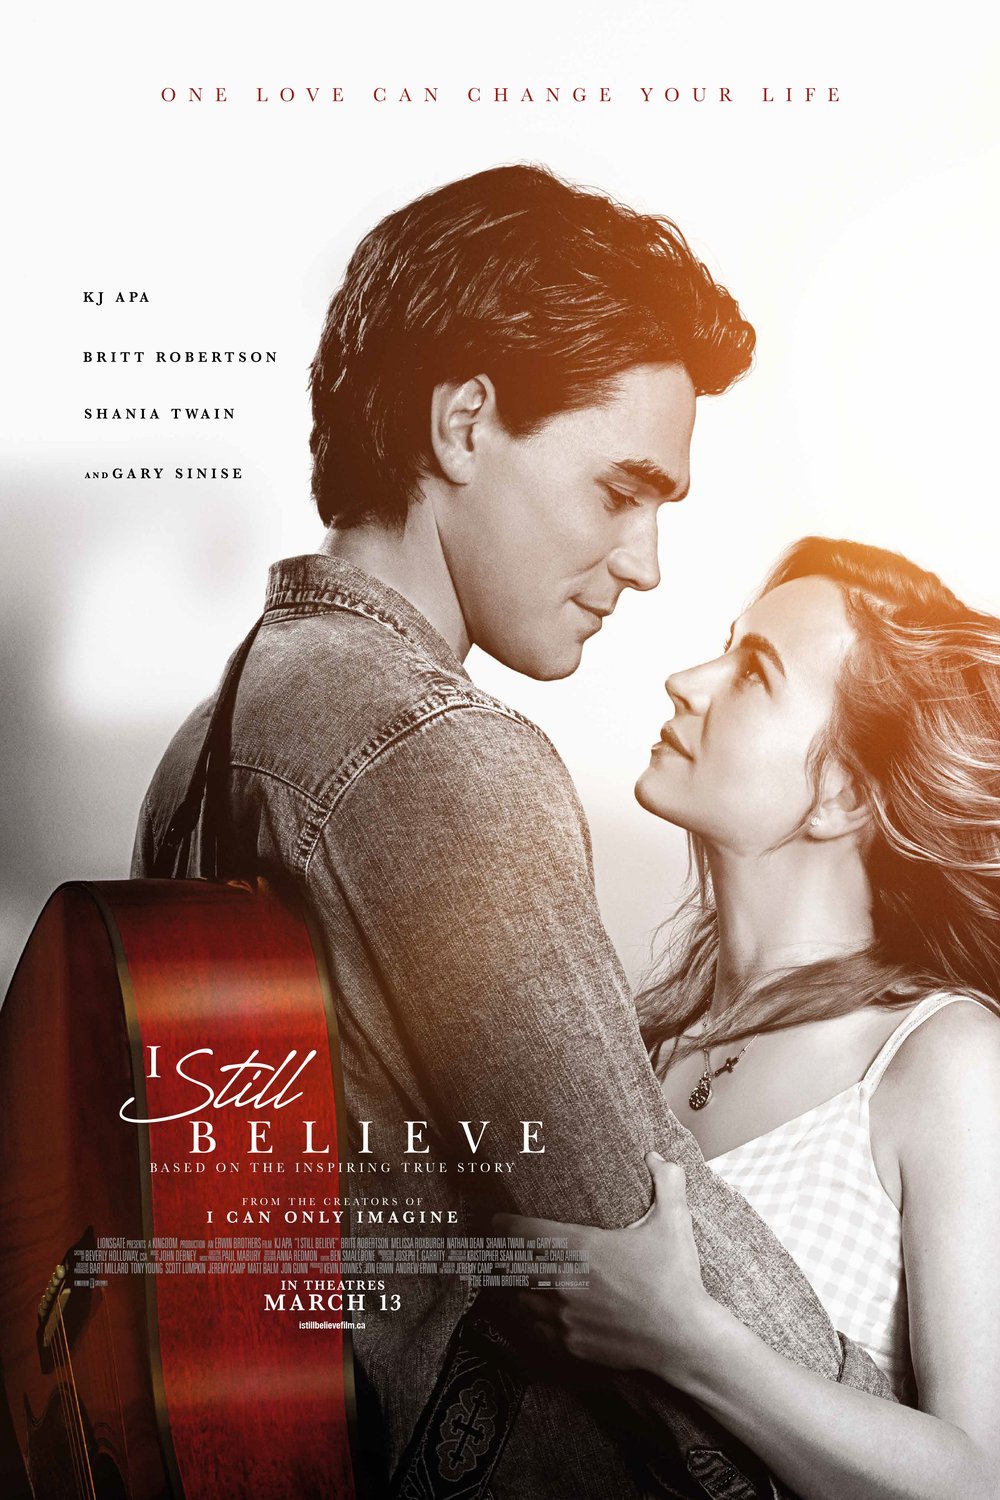 Poster of the movie I Still Believe